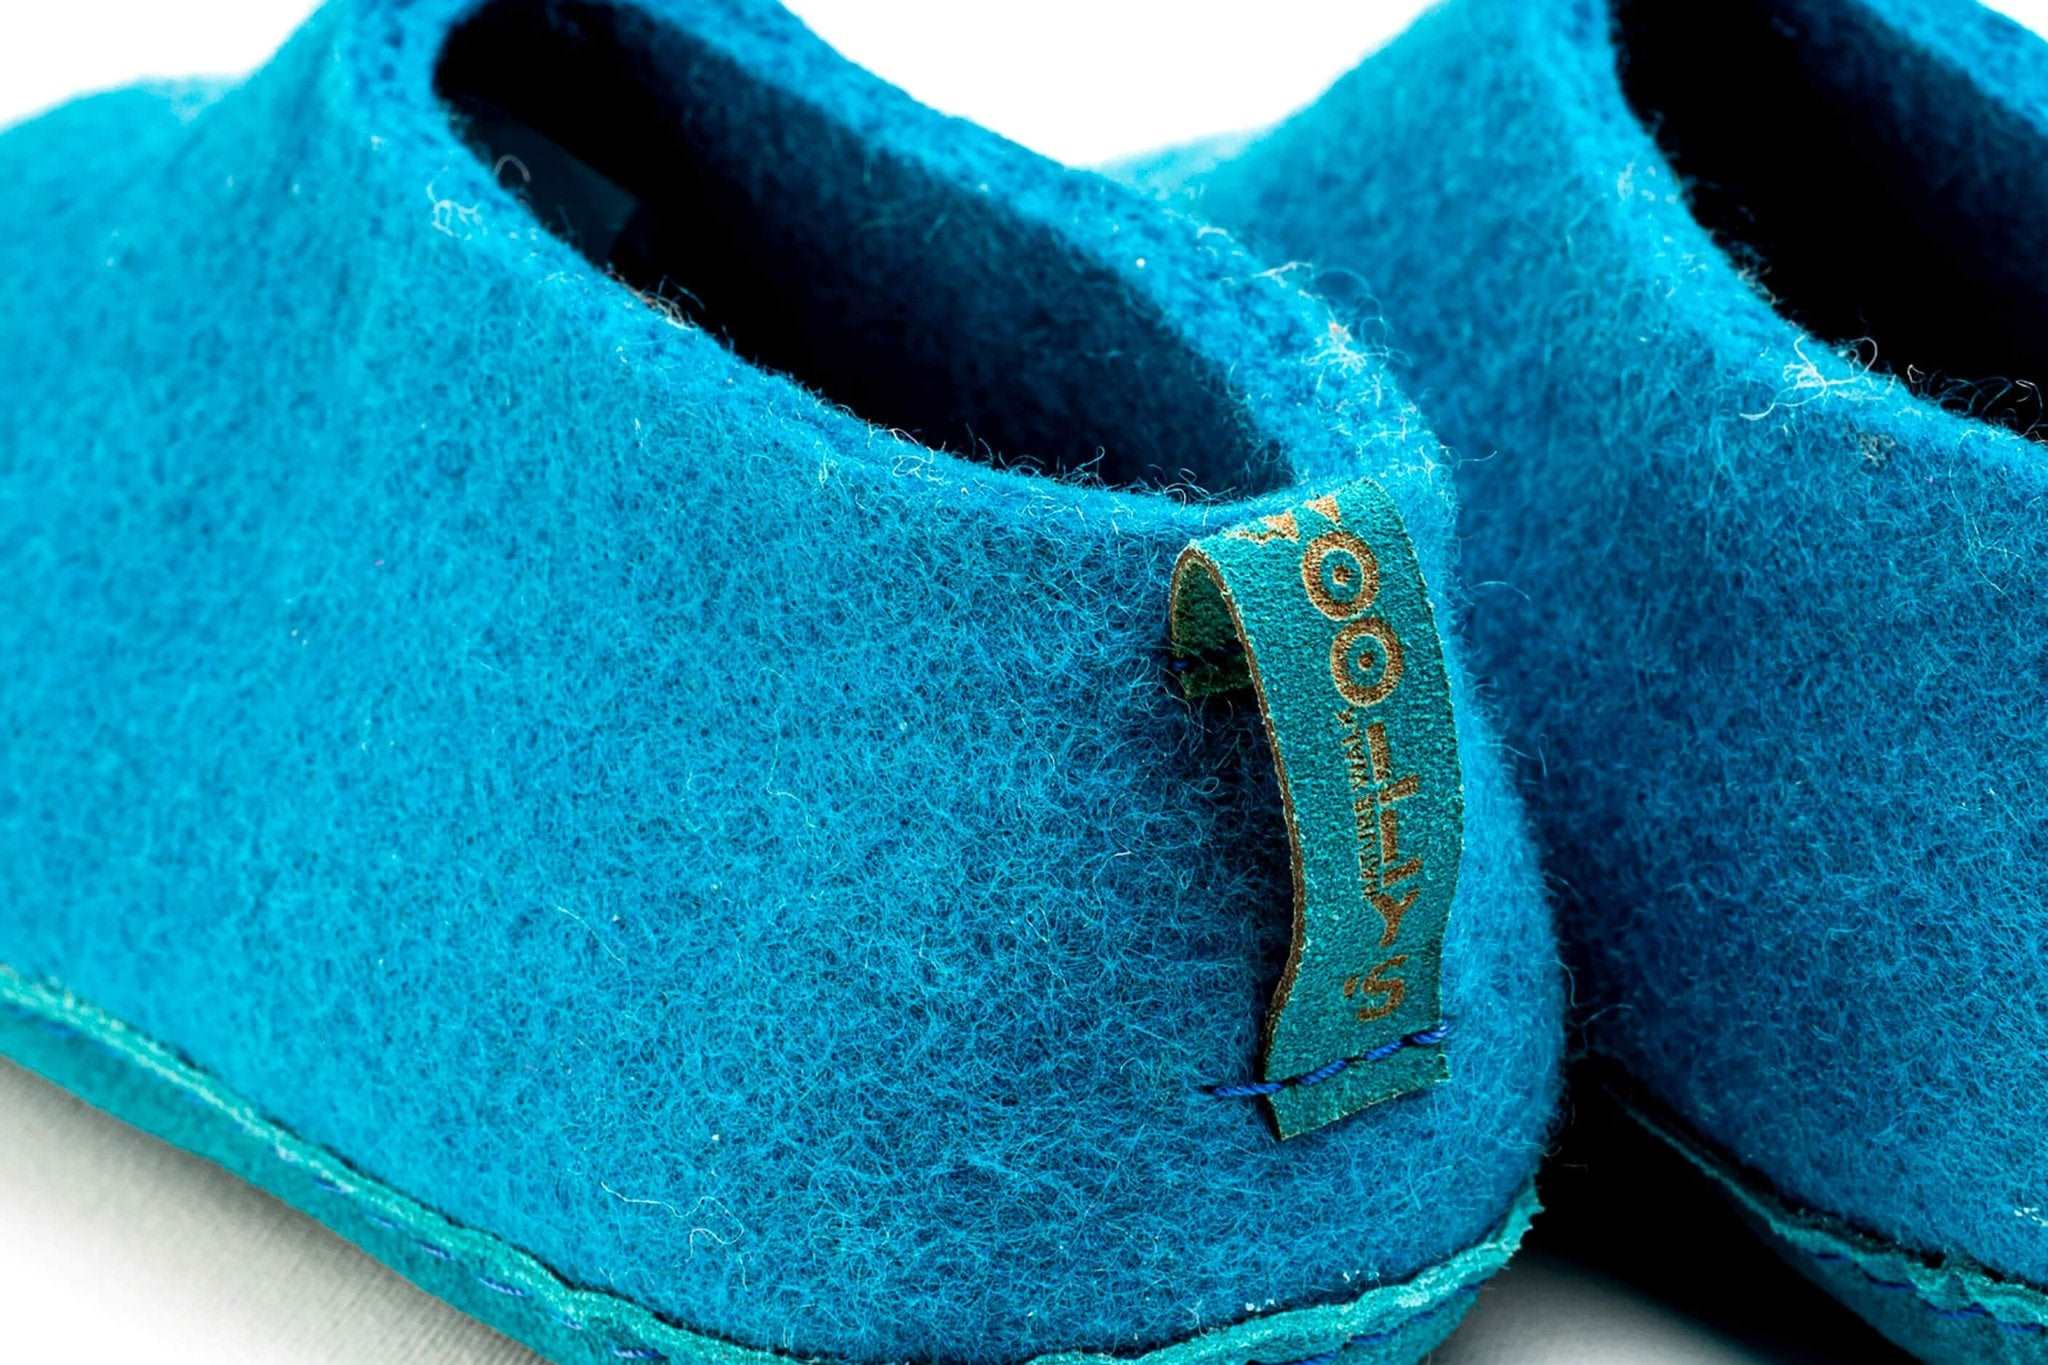 Indoor Shoes With Leather Sole - Turquoise - Woollyes